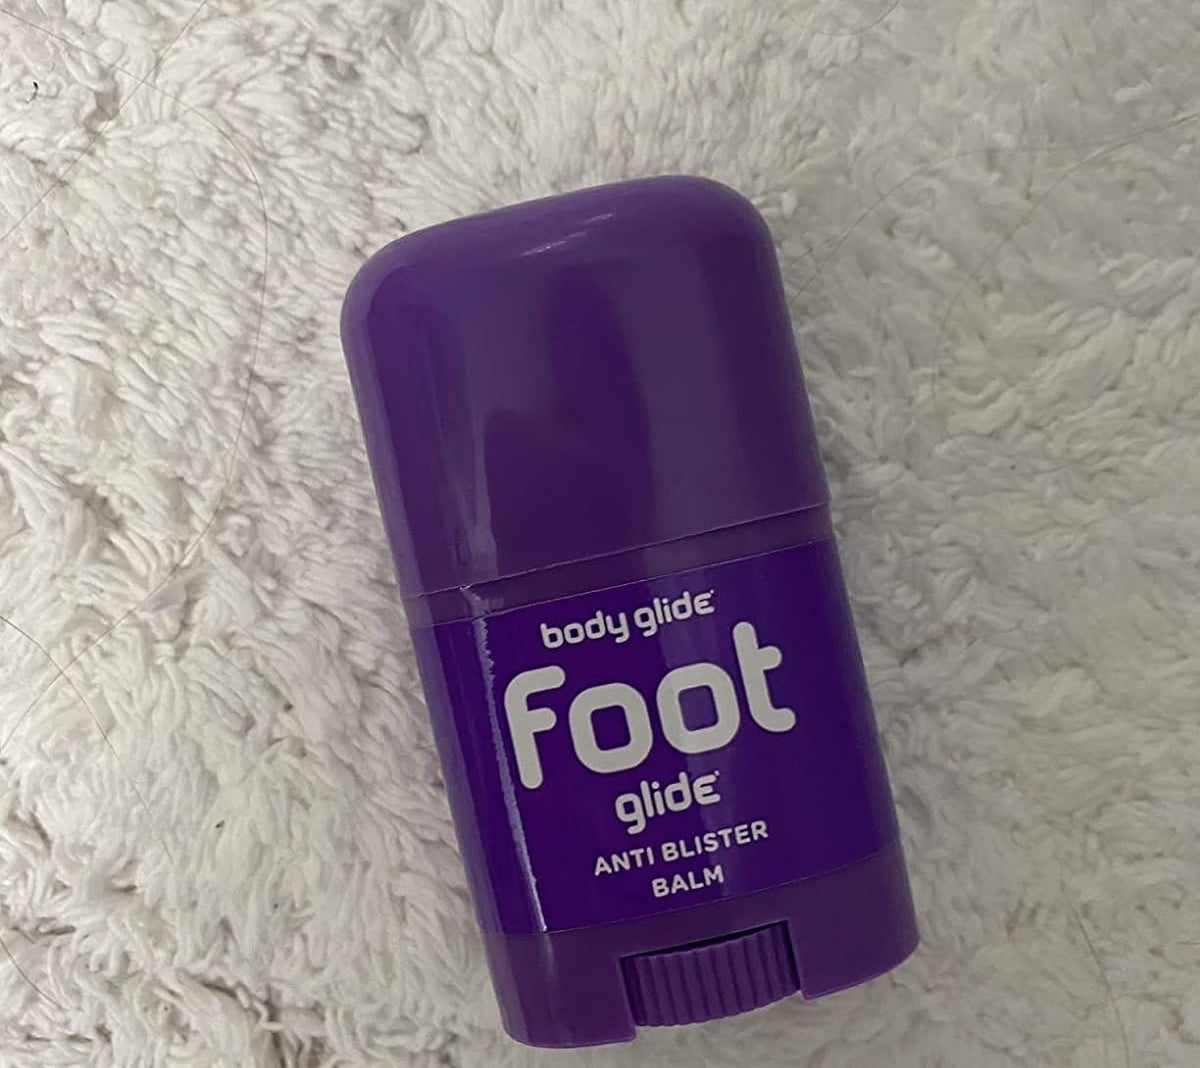 Reviewer’s photo of purple container of foot glide